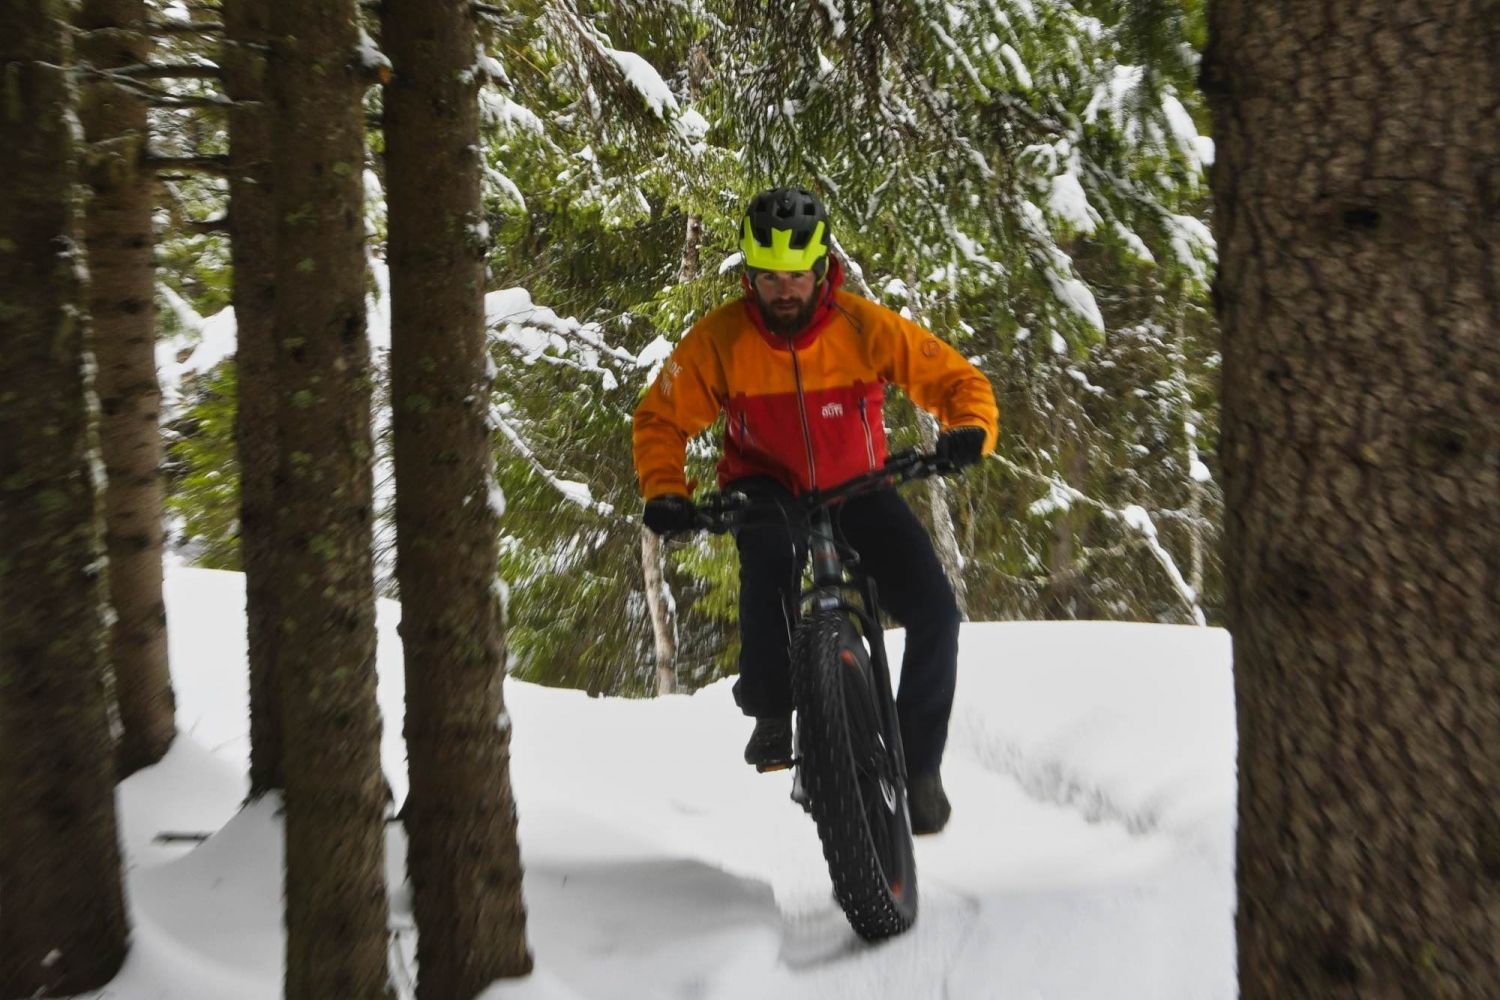 A person on a fatbike among trees in winter